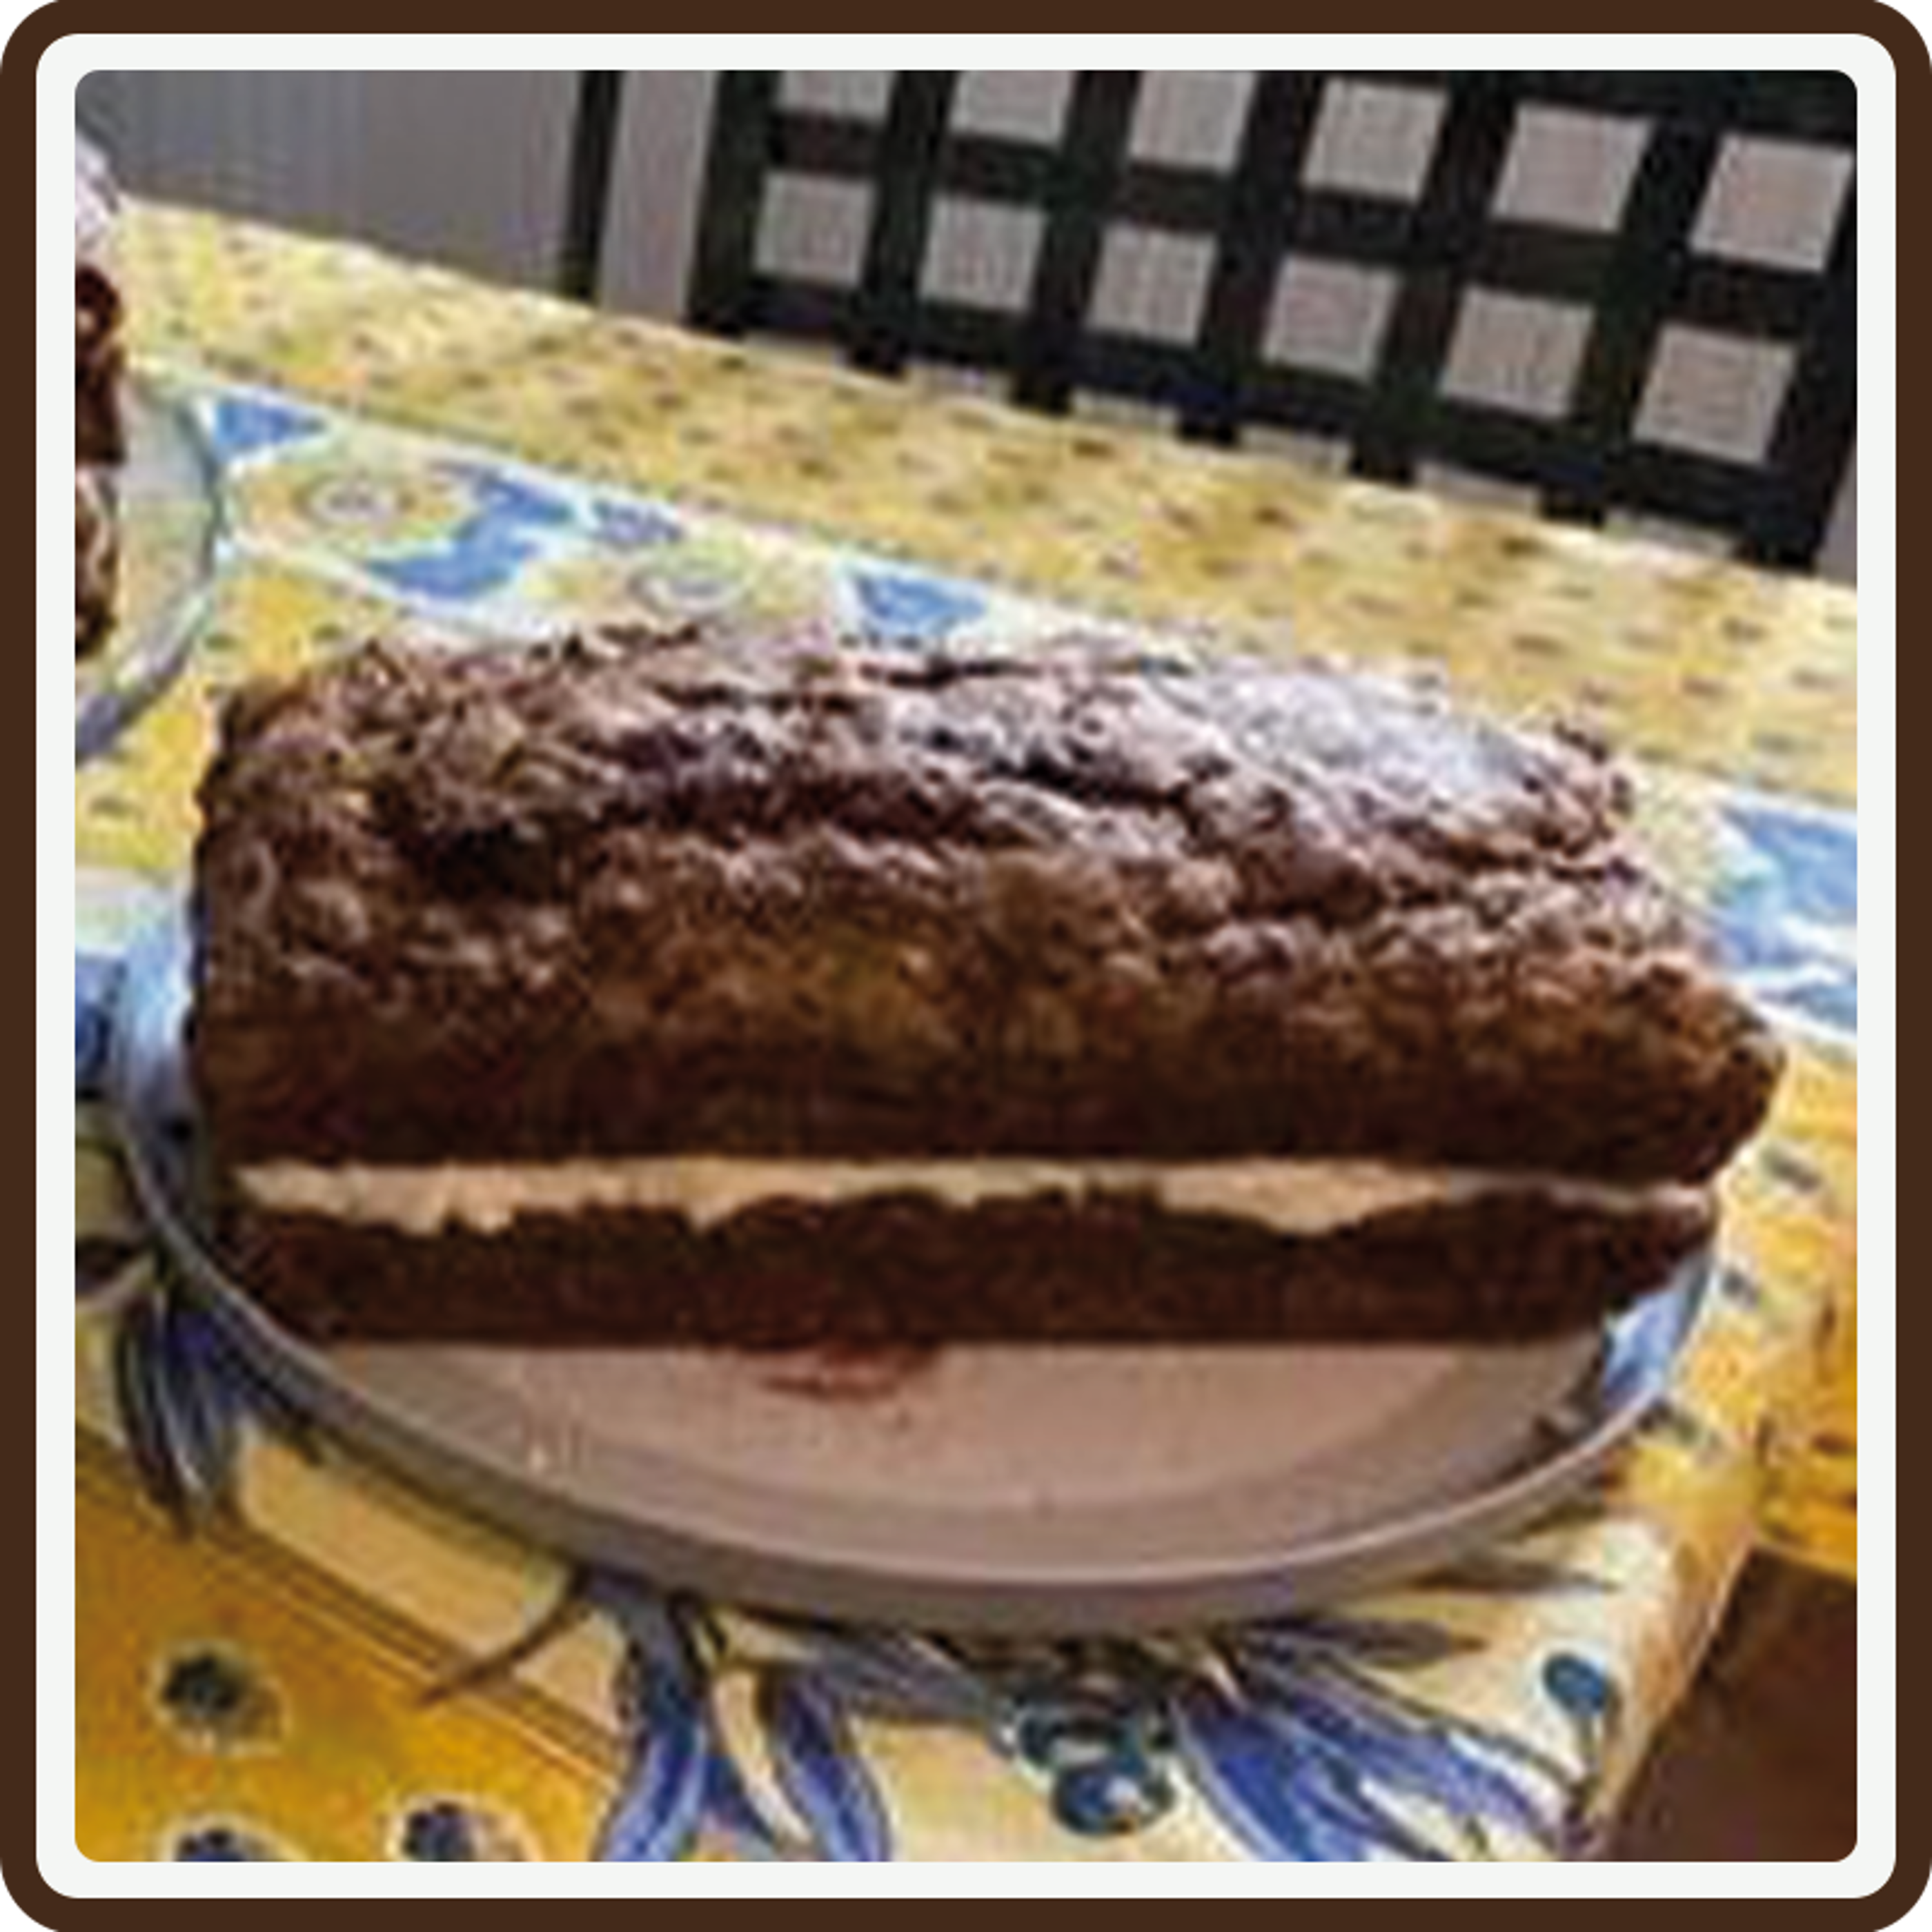 Julie's courgette and lemon cake